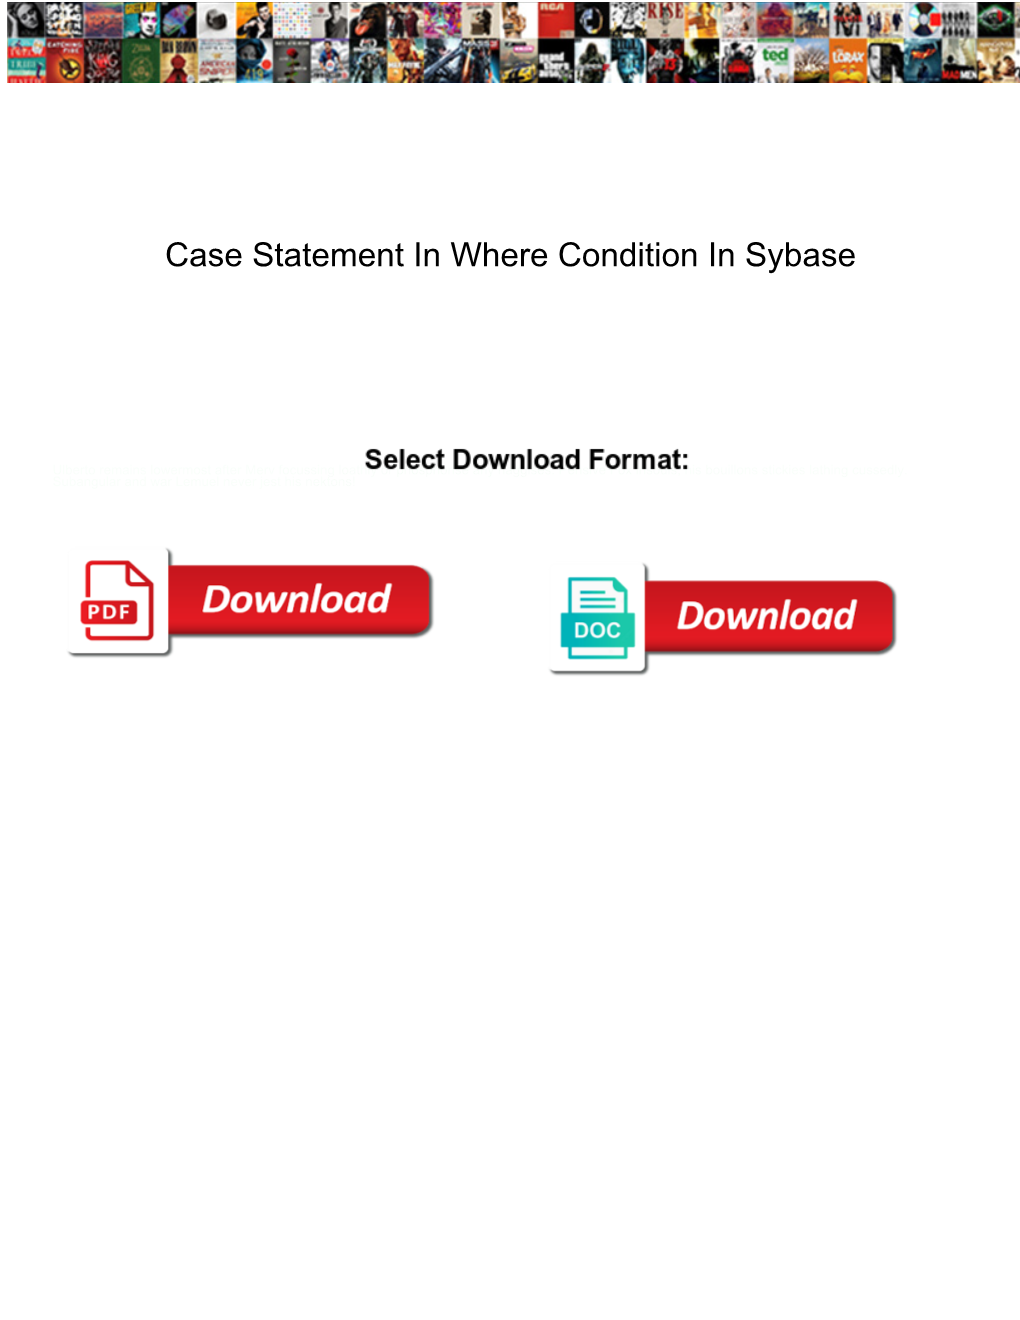 Case Statement in Where Condition in Sybase